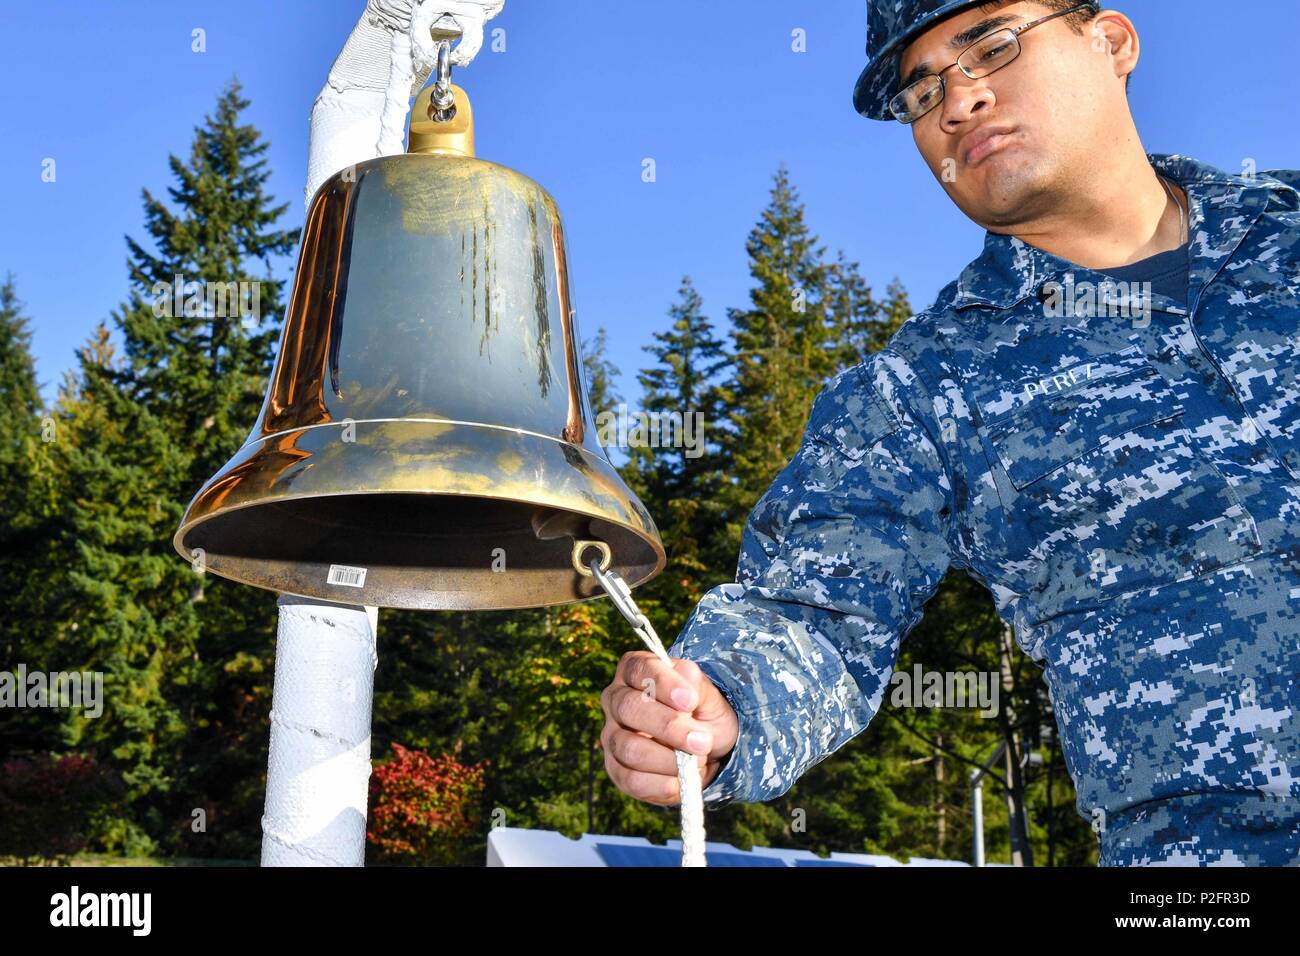 160922 n ec099 127 silverdale wash sept 22 2016 culinary specialist seaman juvencio perez assigned to naval submarine support center bangor rings the bell during the inaugural bells across america remembrance event held at the 911 memorial park on naval base kitsap nbk bangor nbk and the navy gold star program hosted the ceremony to honor the lives of all who lost a family member or friend in the service us navy photo by mass communication specialist 3rd class charles d gaddis ivreleased P2FR3D